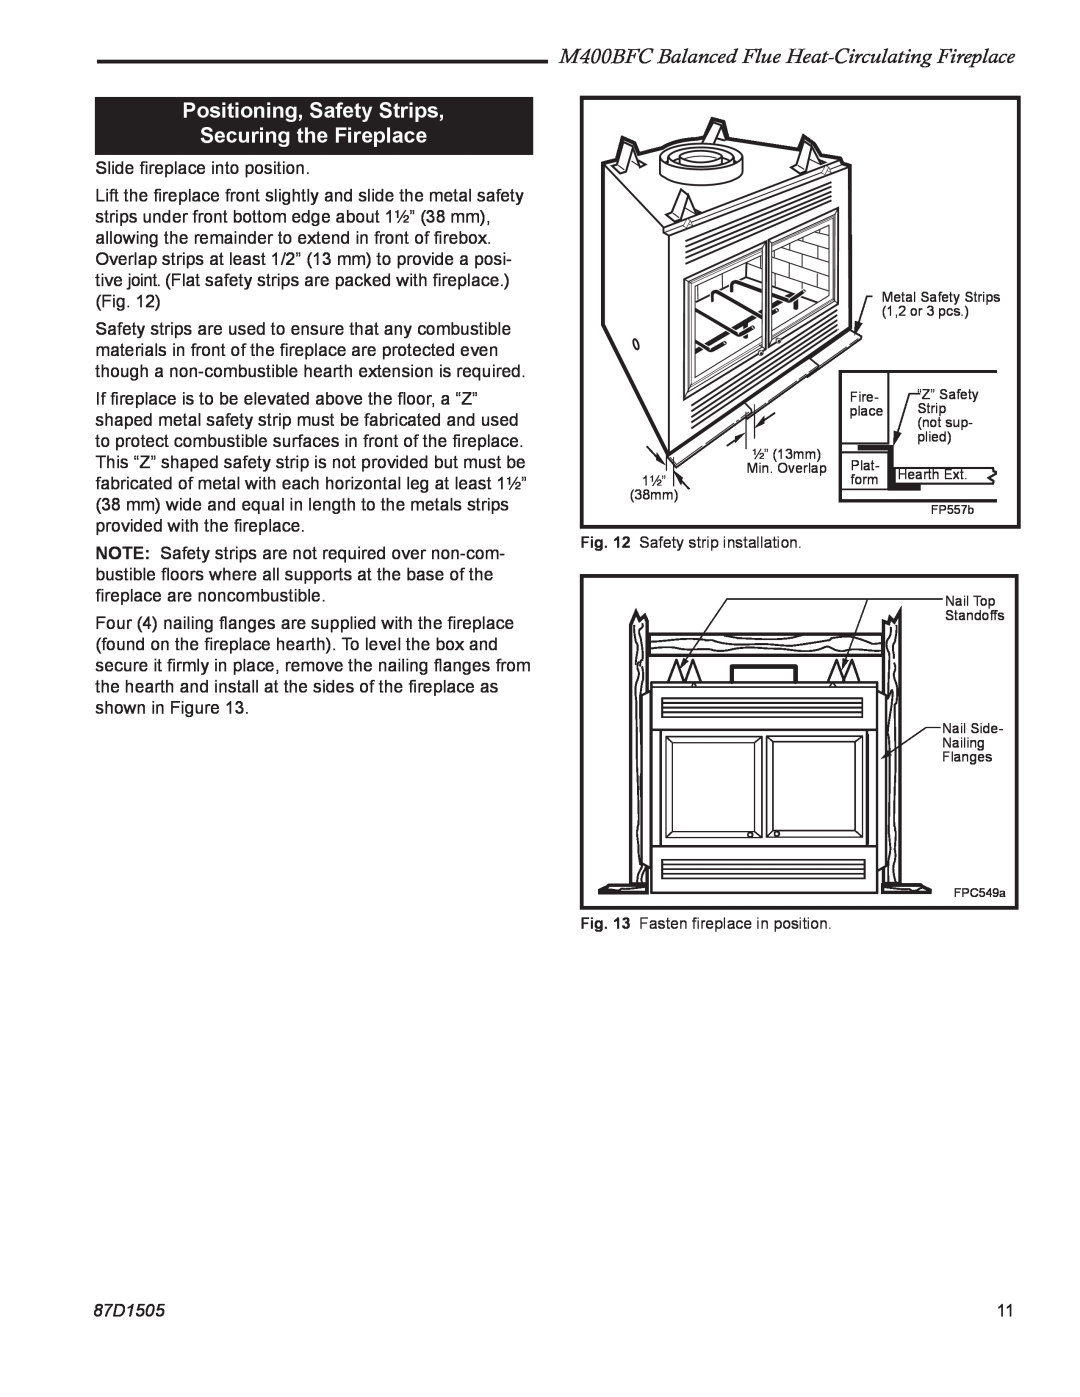 Monessen Hearth M400BFC manual Positioning, Safety Strips Securing the Fireplace, 87D1505 